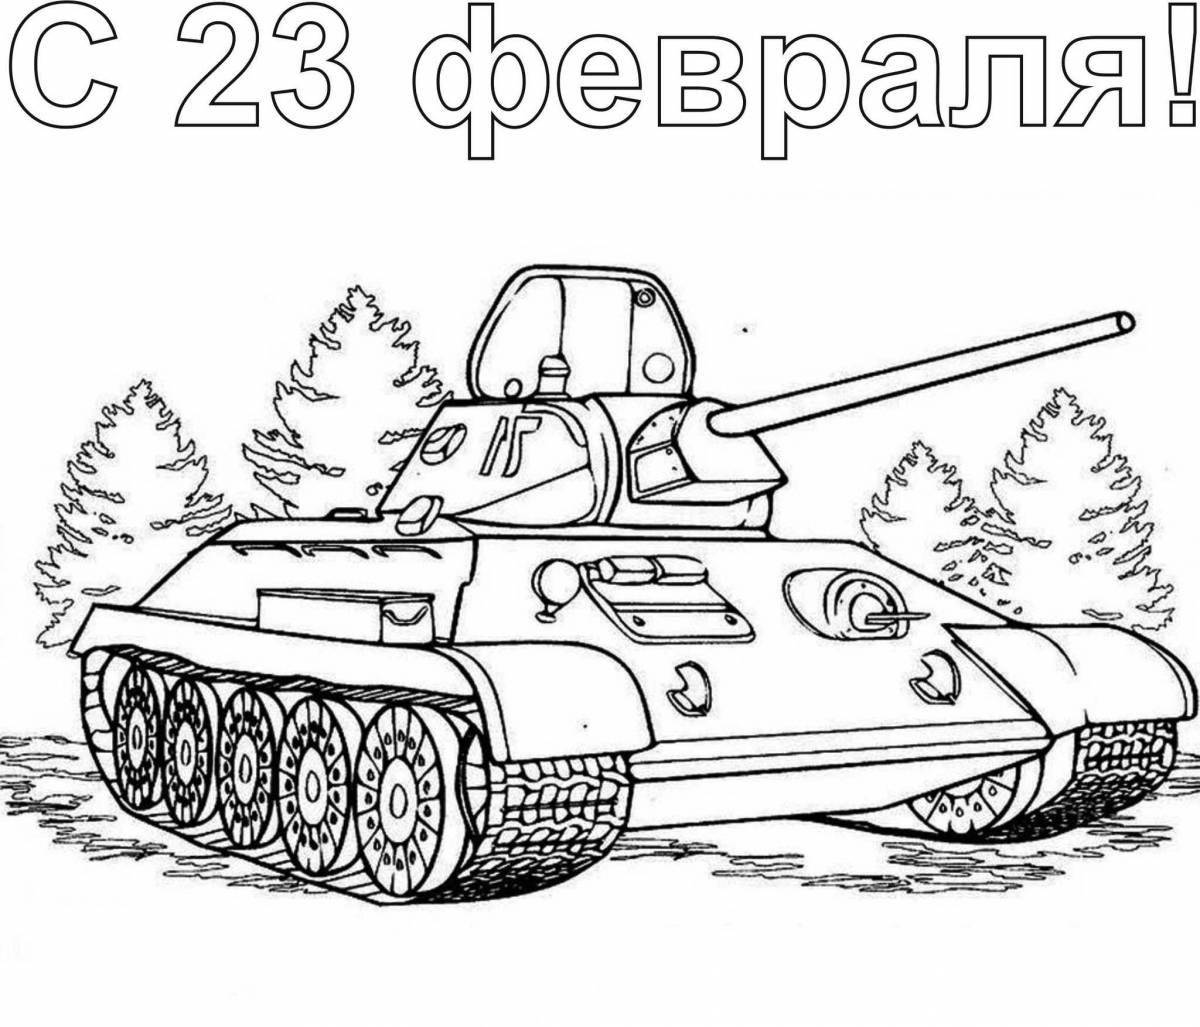 Dazzling tank ms 1 coloring page